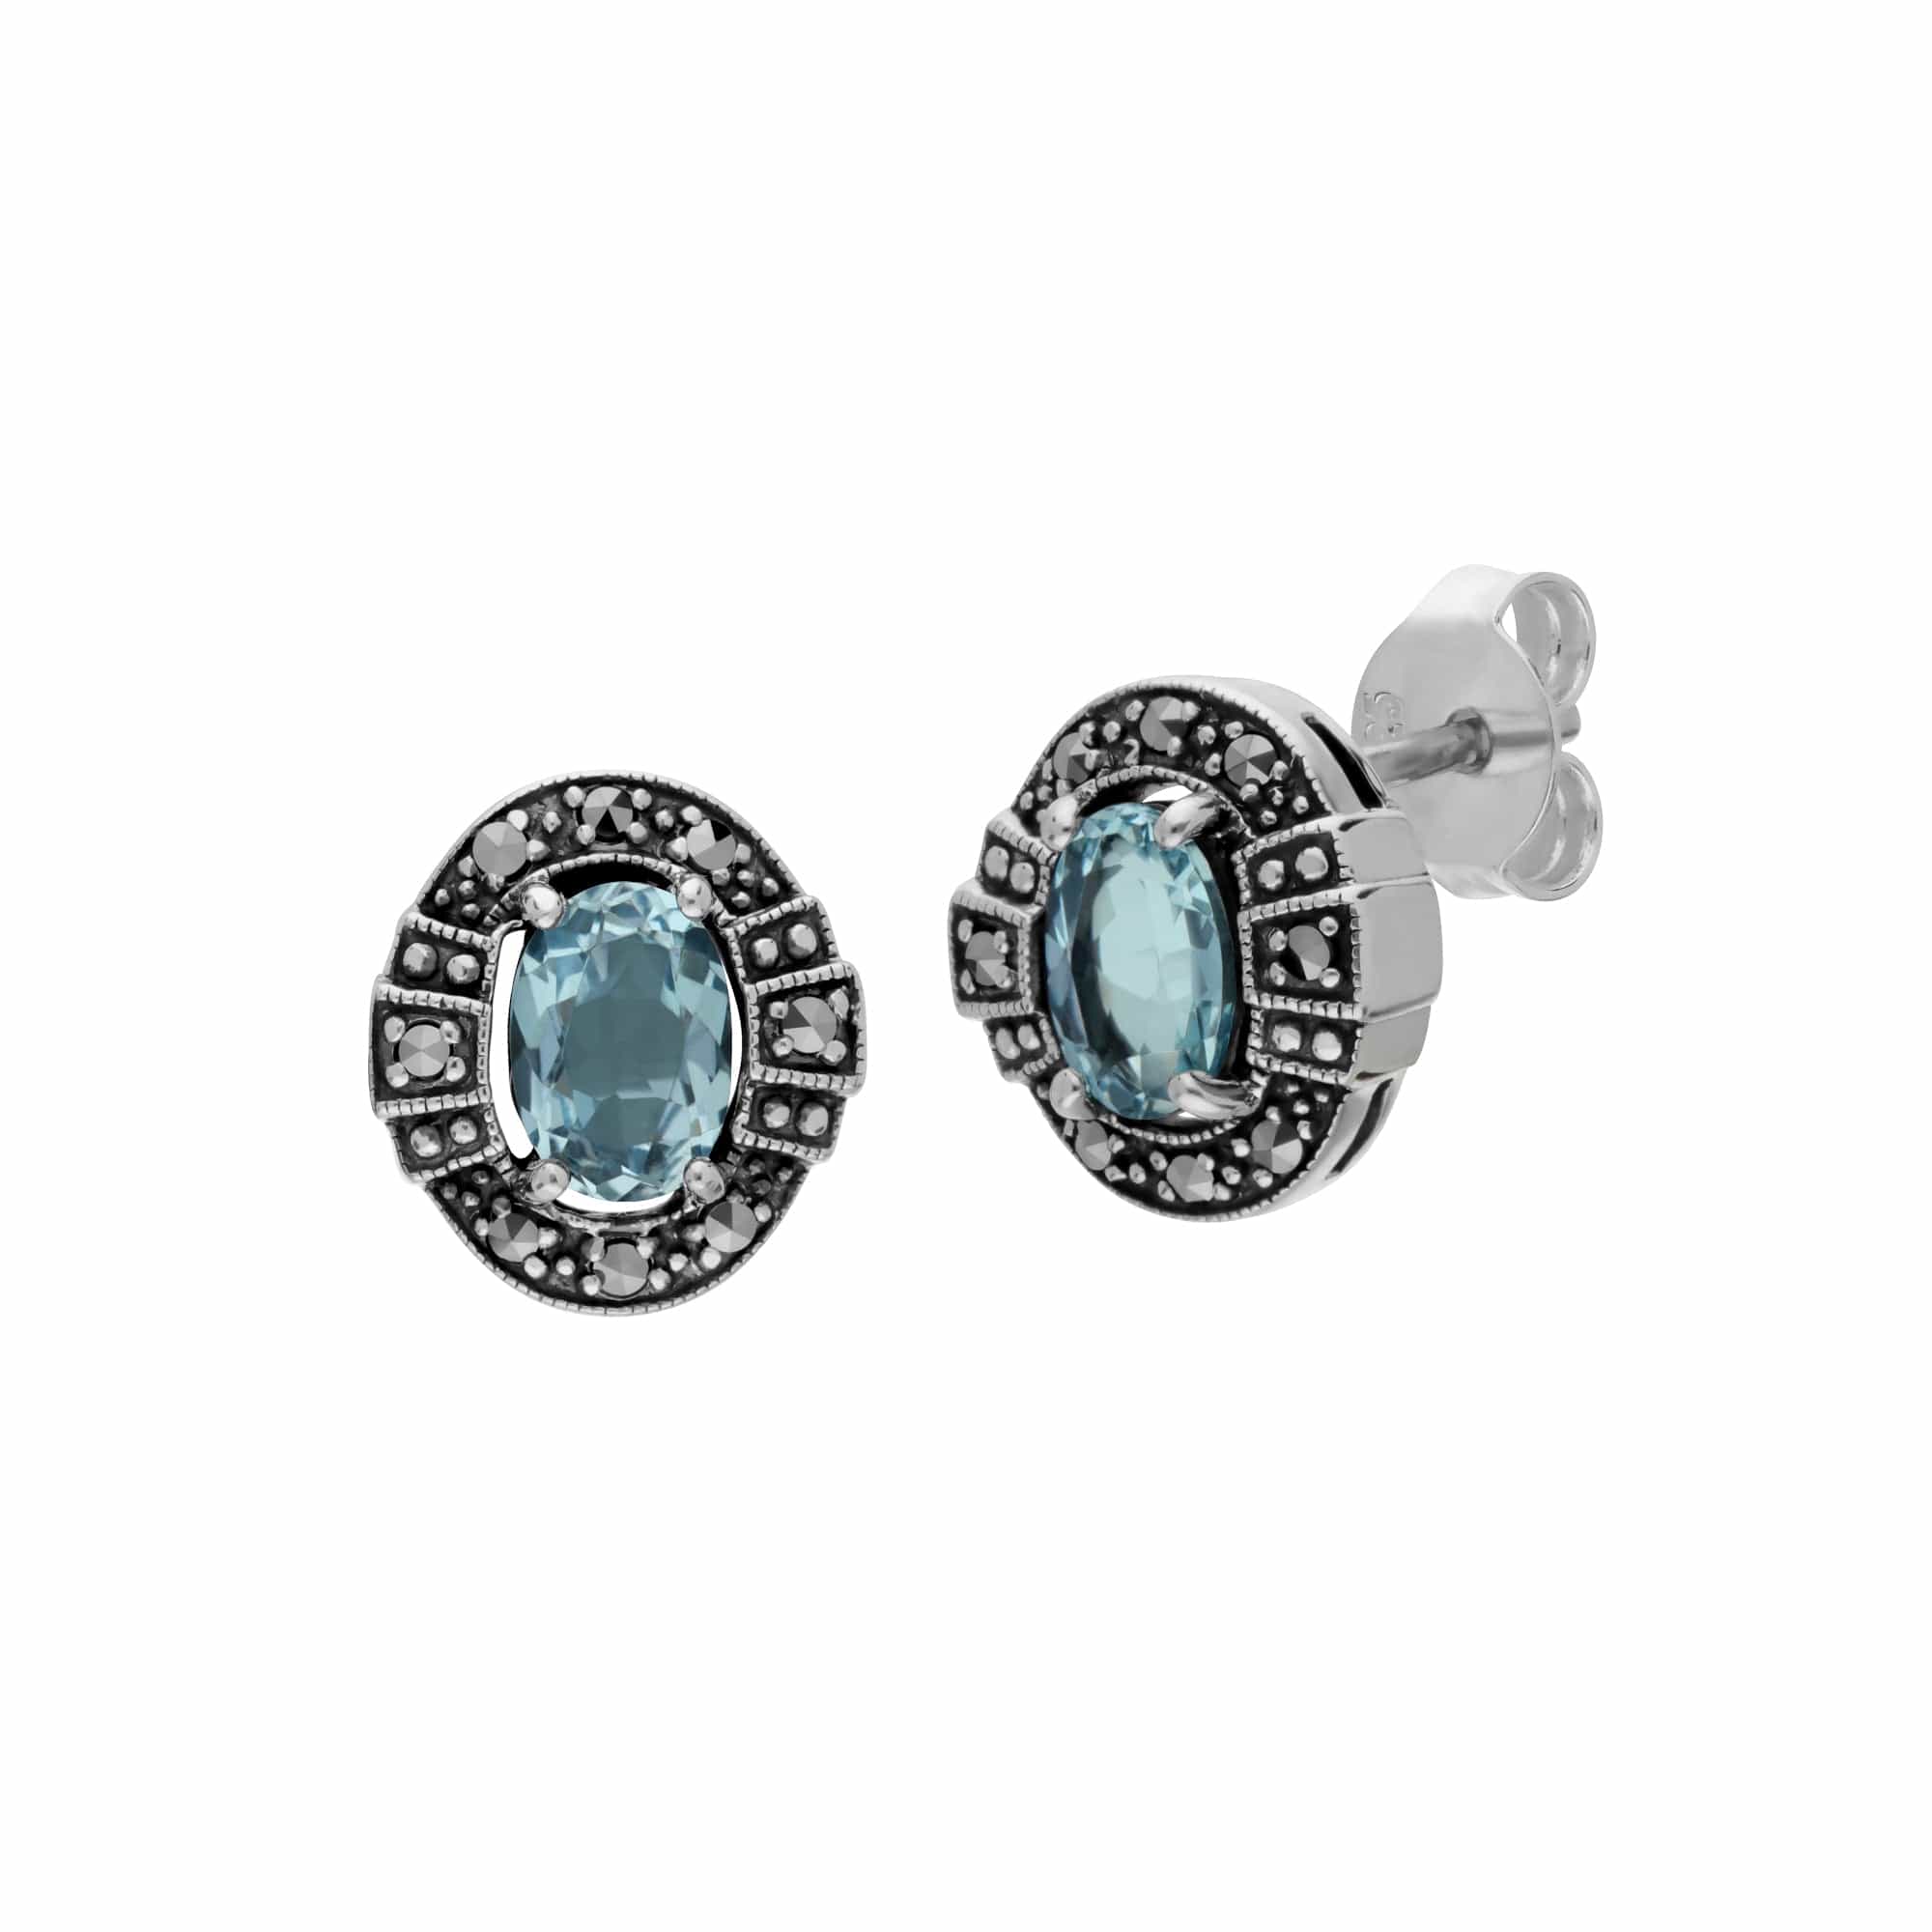 214P303301925-214L165401925 Art Deco Style Oval Blue Topaz and Marcasite Cluster Bracelet & Pendant Set in 925 Sterling Silver 2